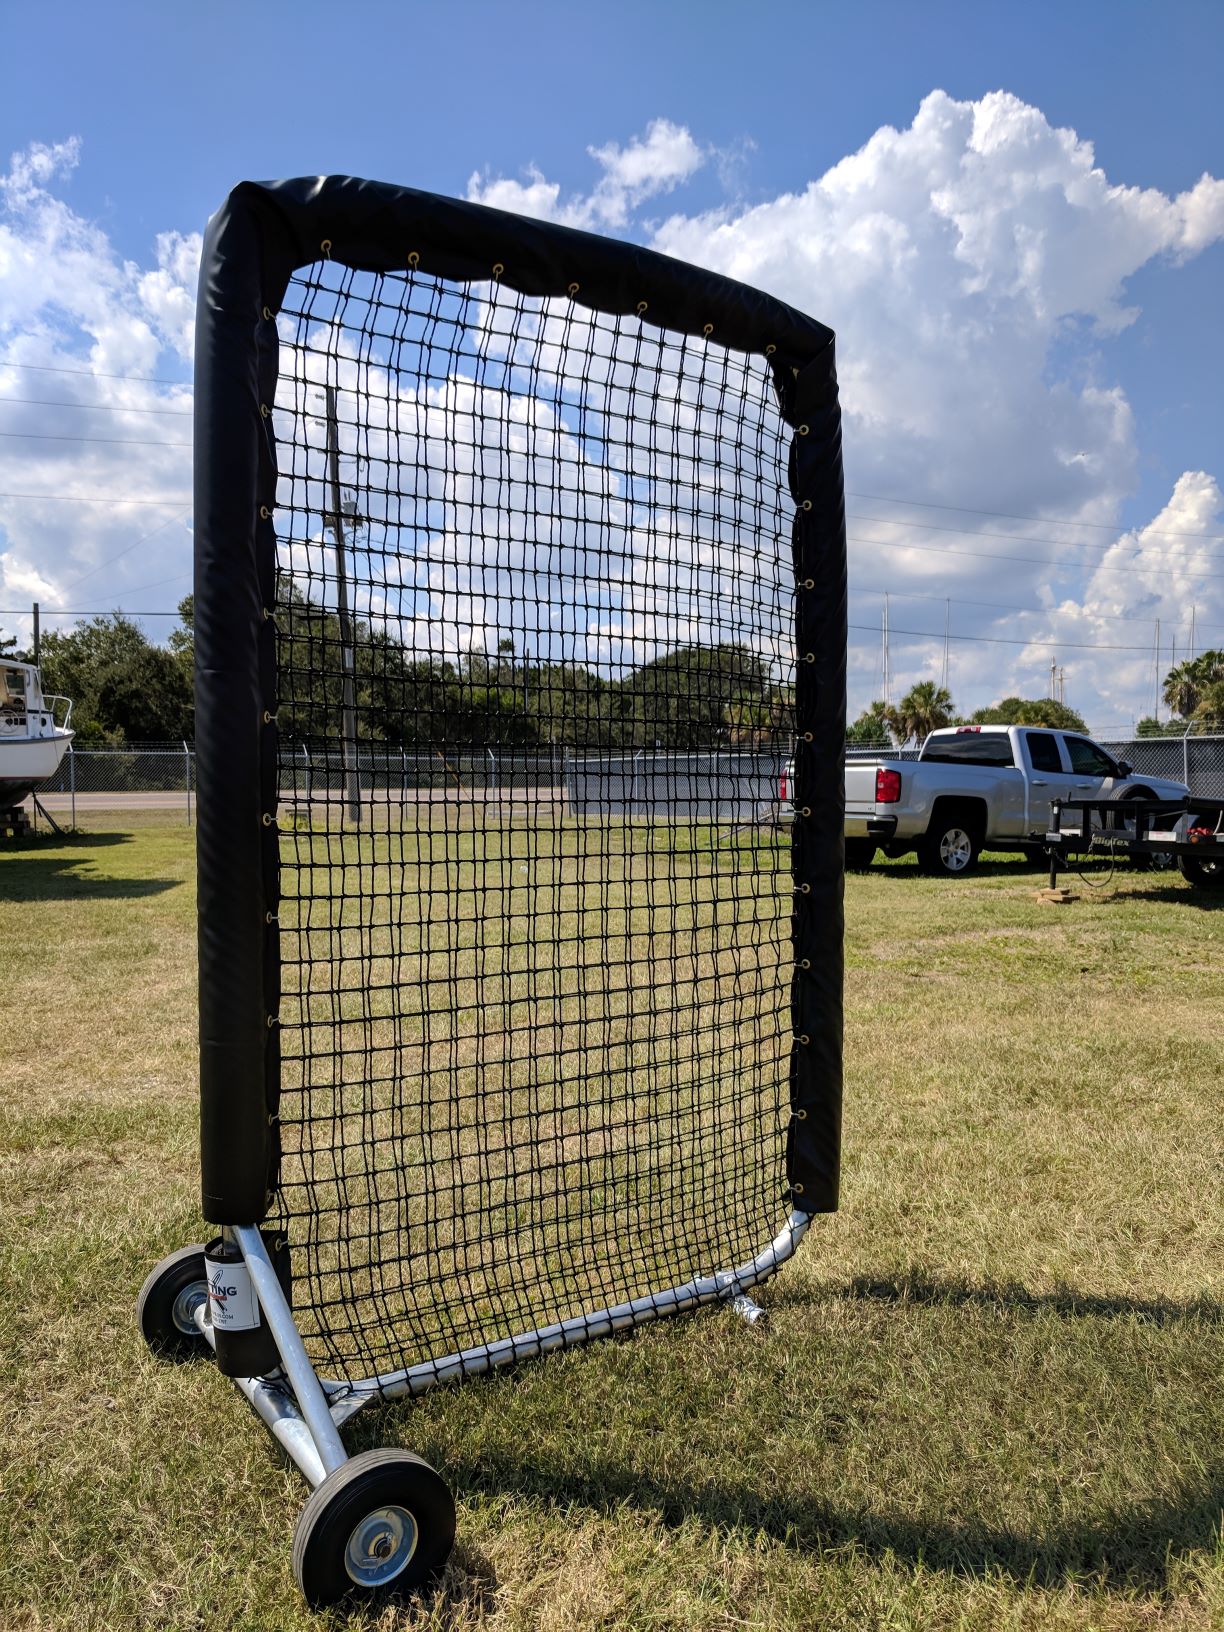 A baseball catcher 's screen in the middle of a field.